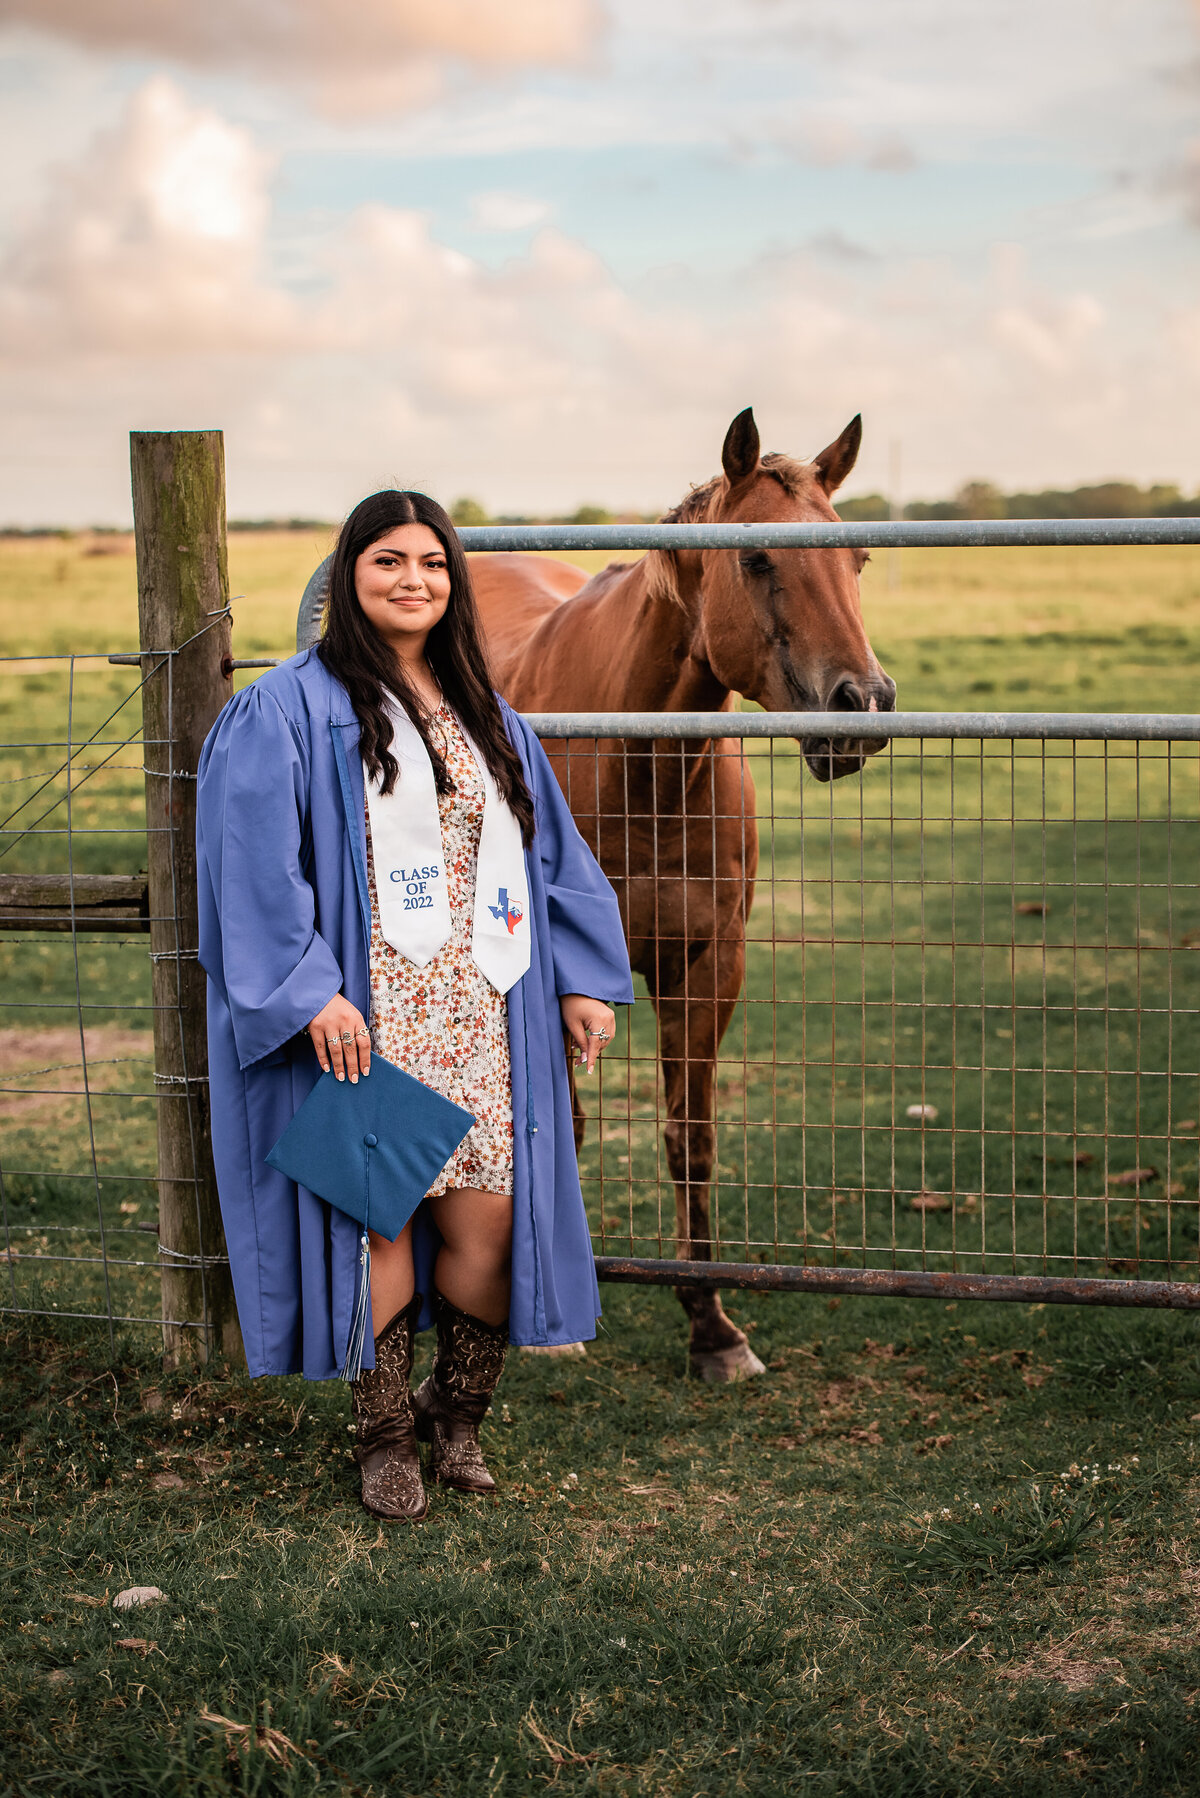 A girl wearing a blue cap and gown stands near a fence next to a horse.